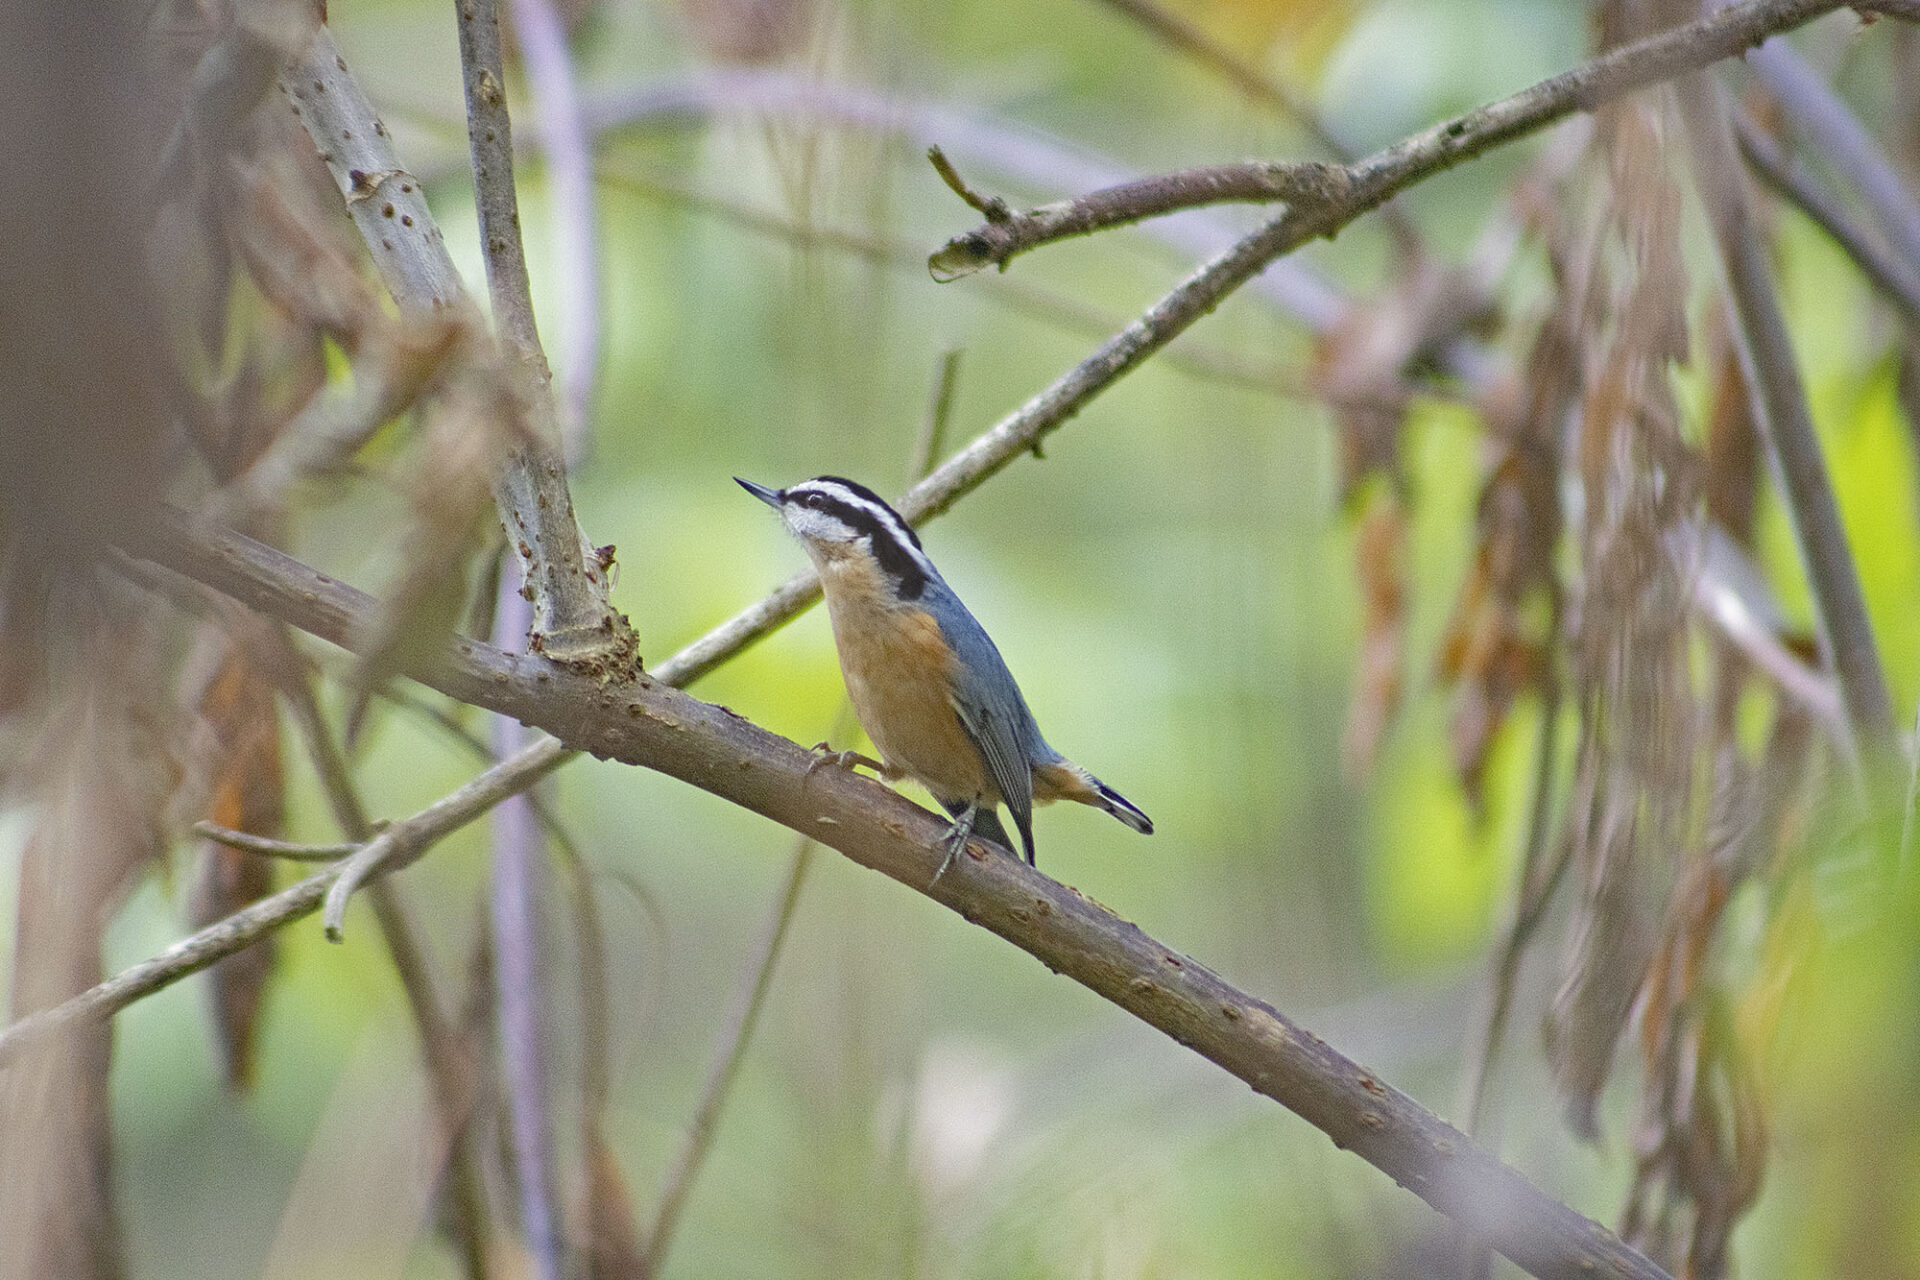 Red-breasted Nuthatch, August 16, 2021